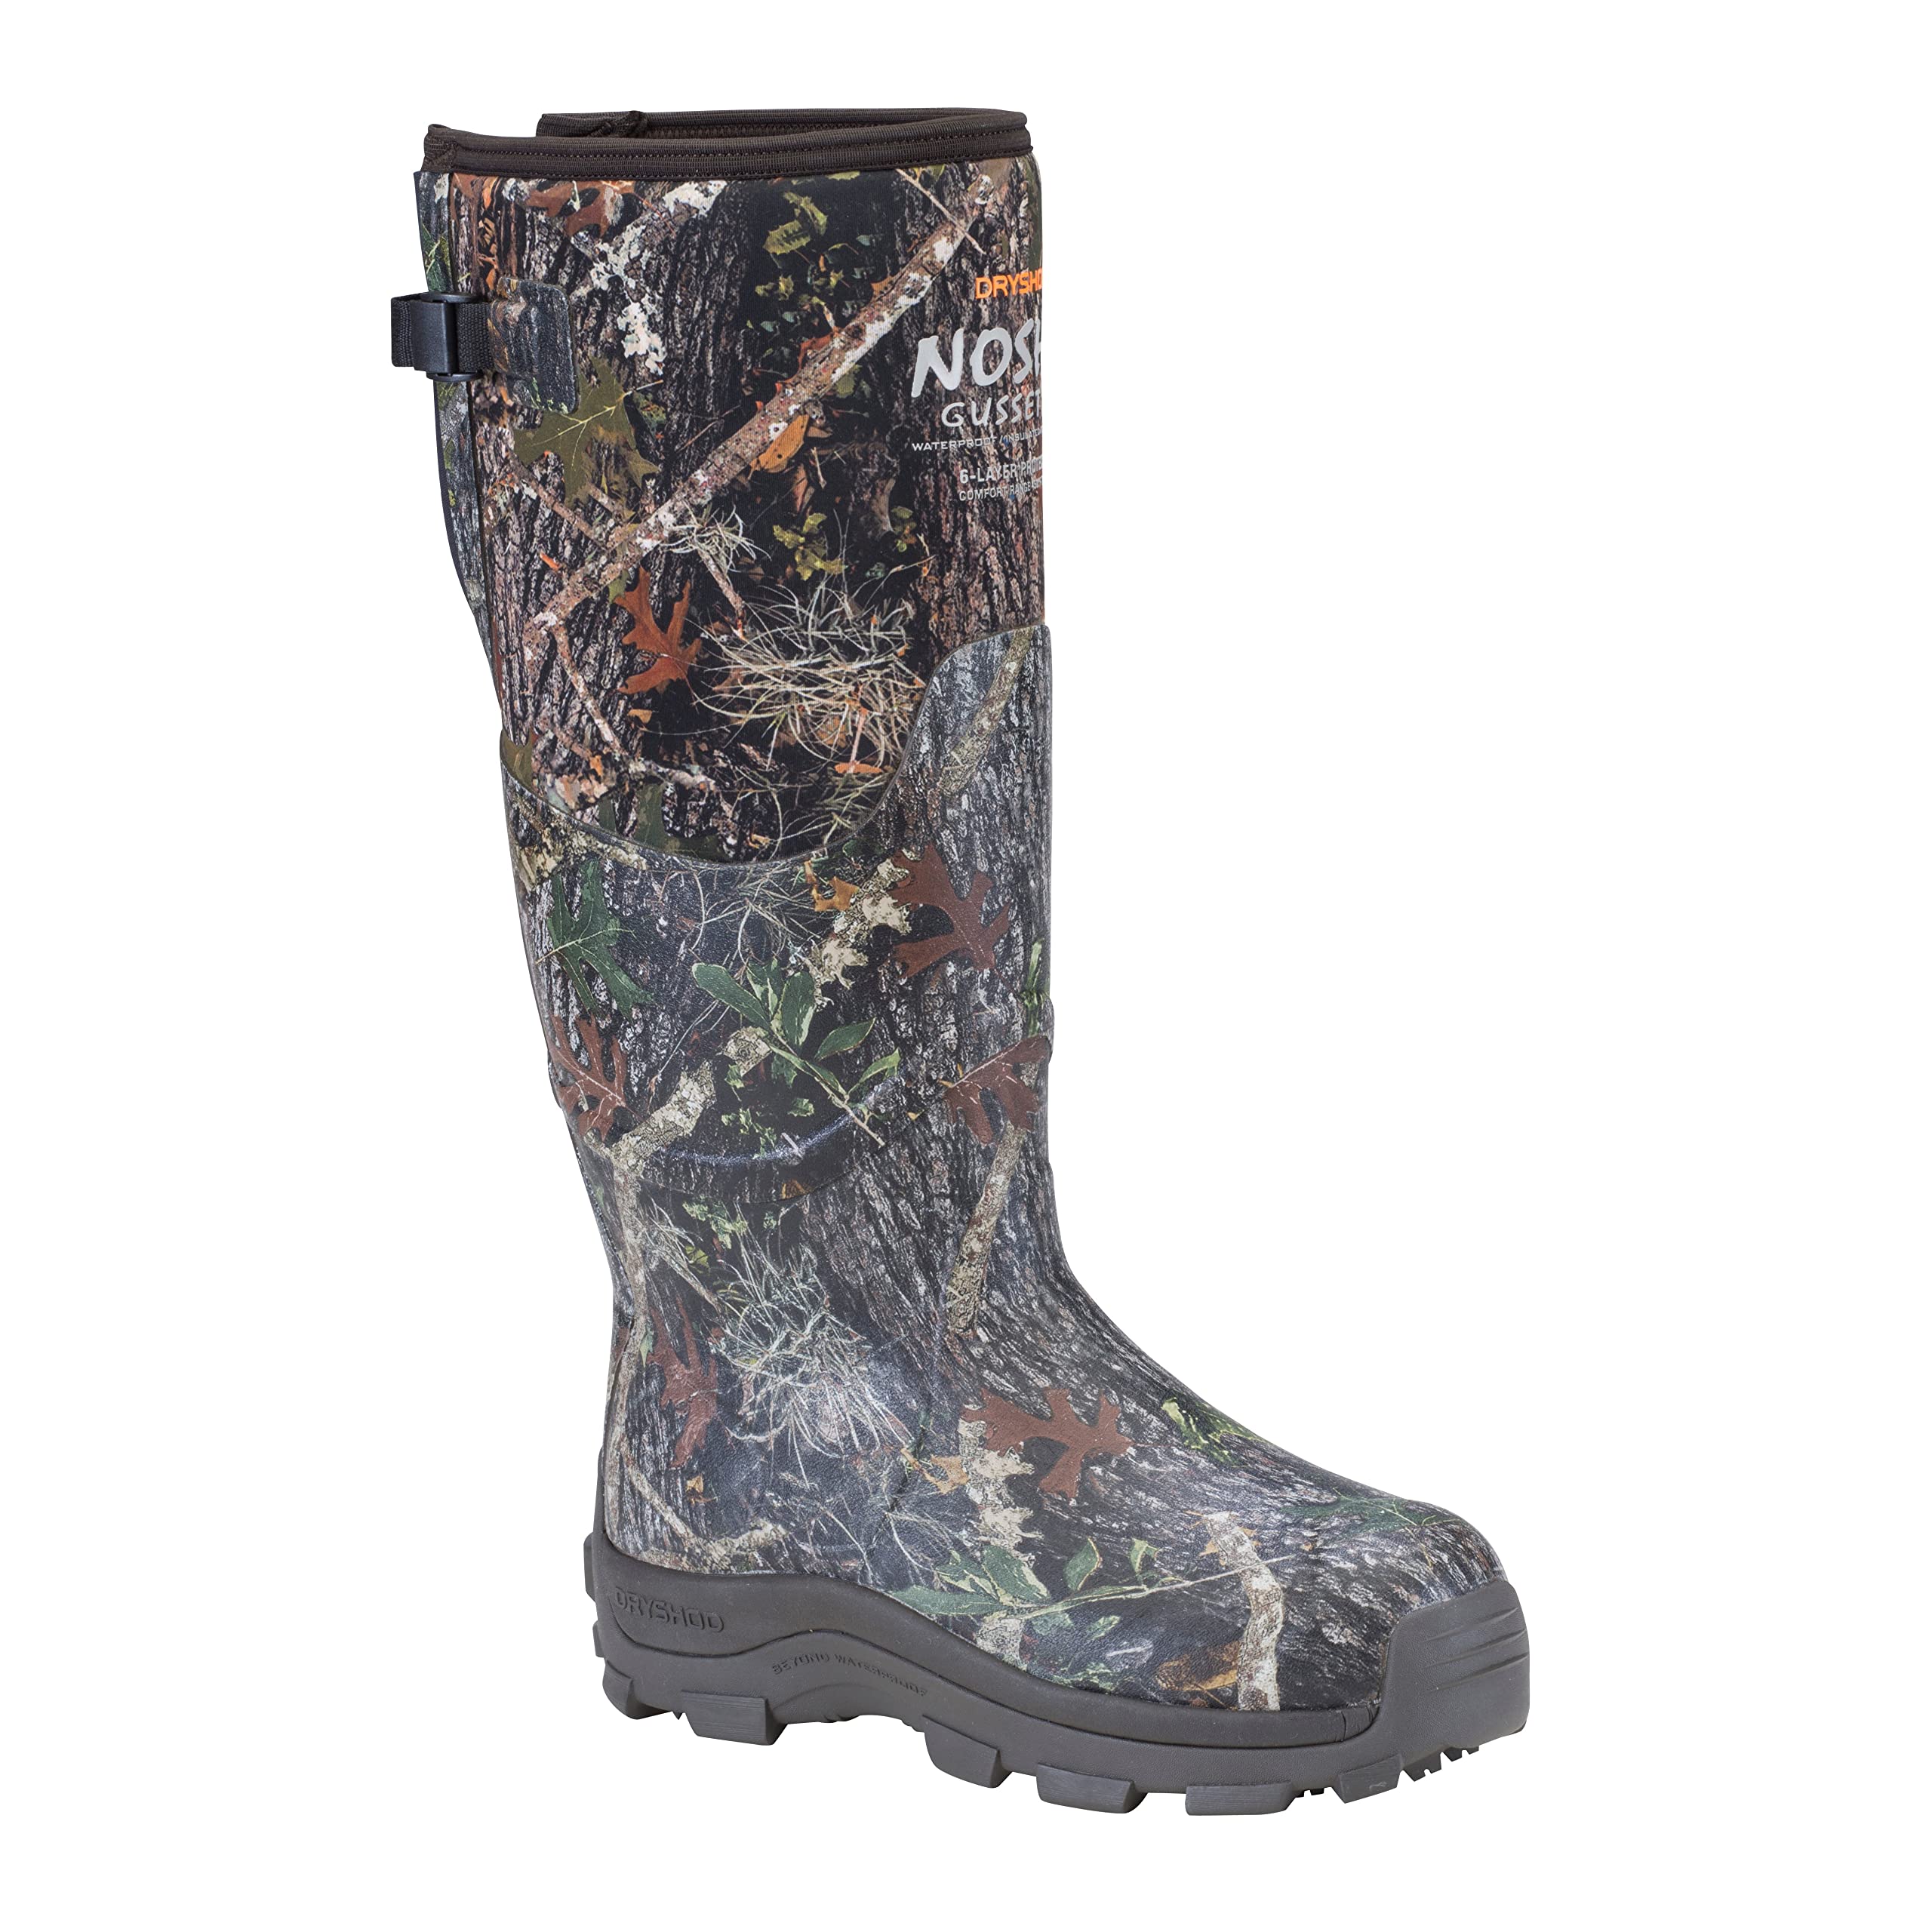 DRYSHOD Men's NoSho Gusset XT Extreme Cold-Conditions Hunting Boot